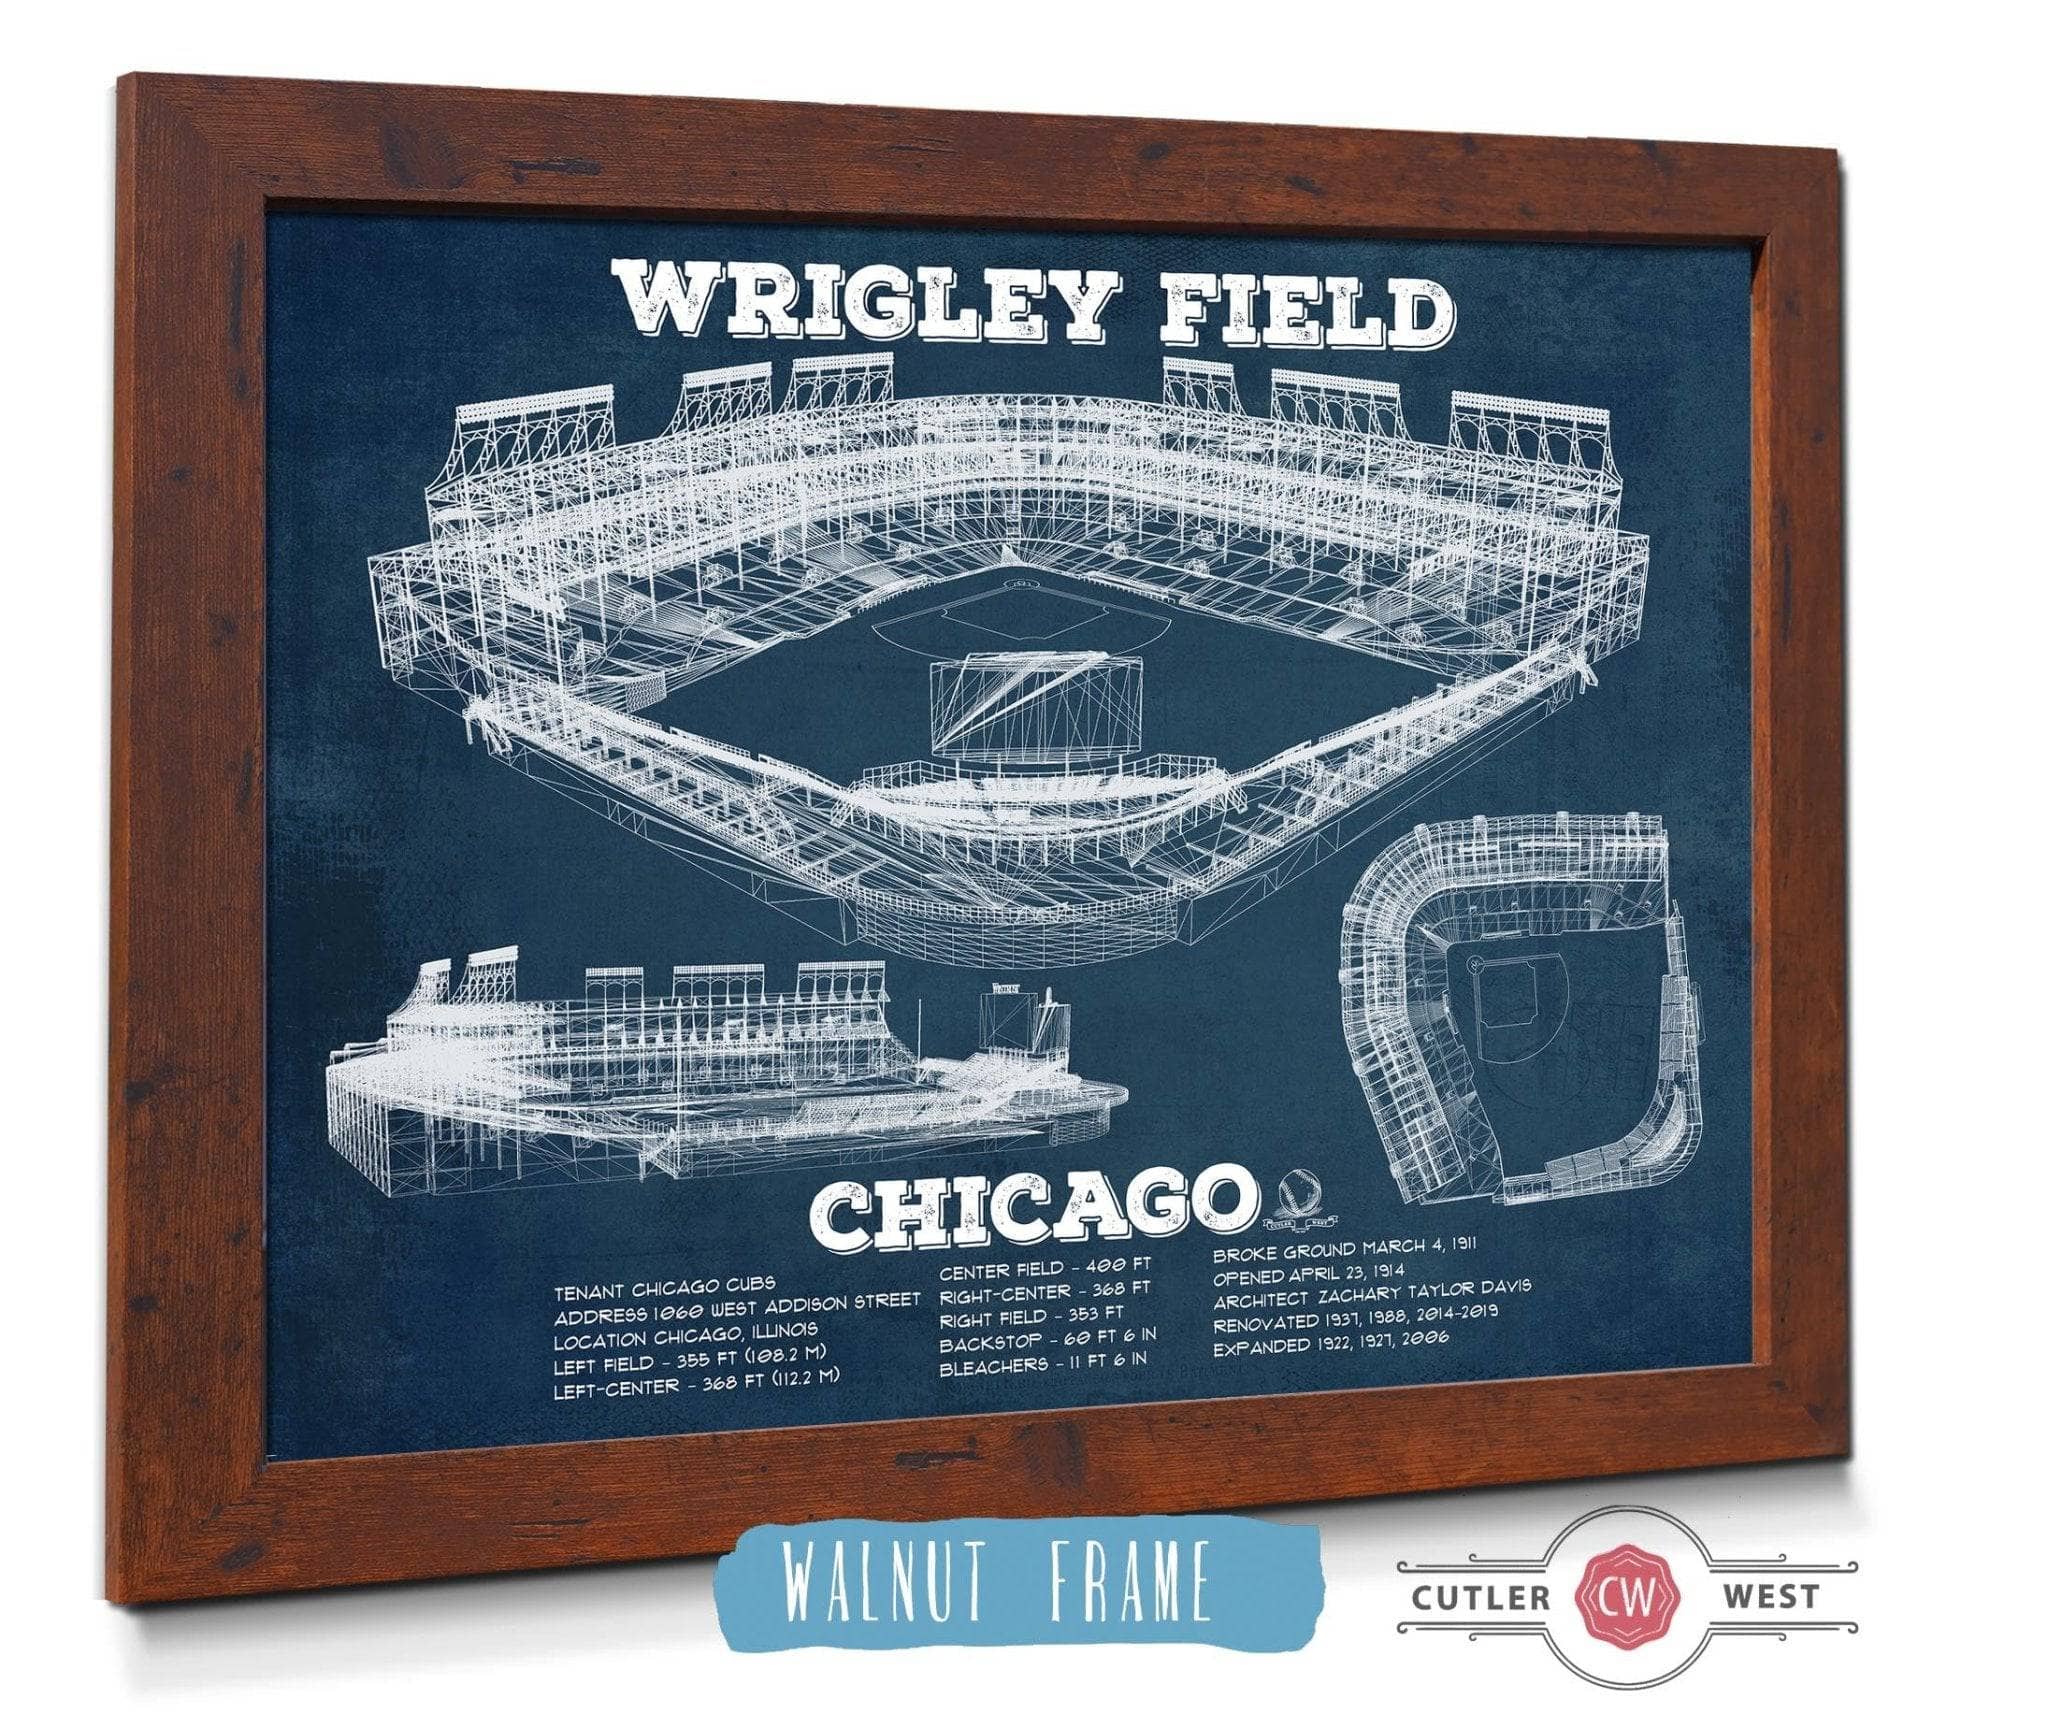 VTG Wrigley Field Chicago Cubs Majestic Cooperstown Collection